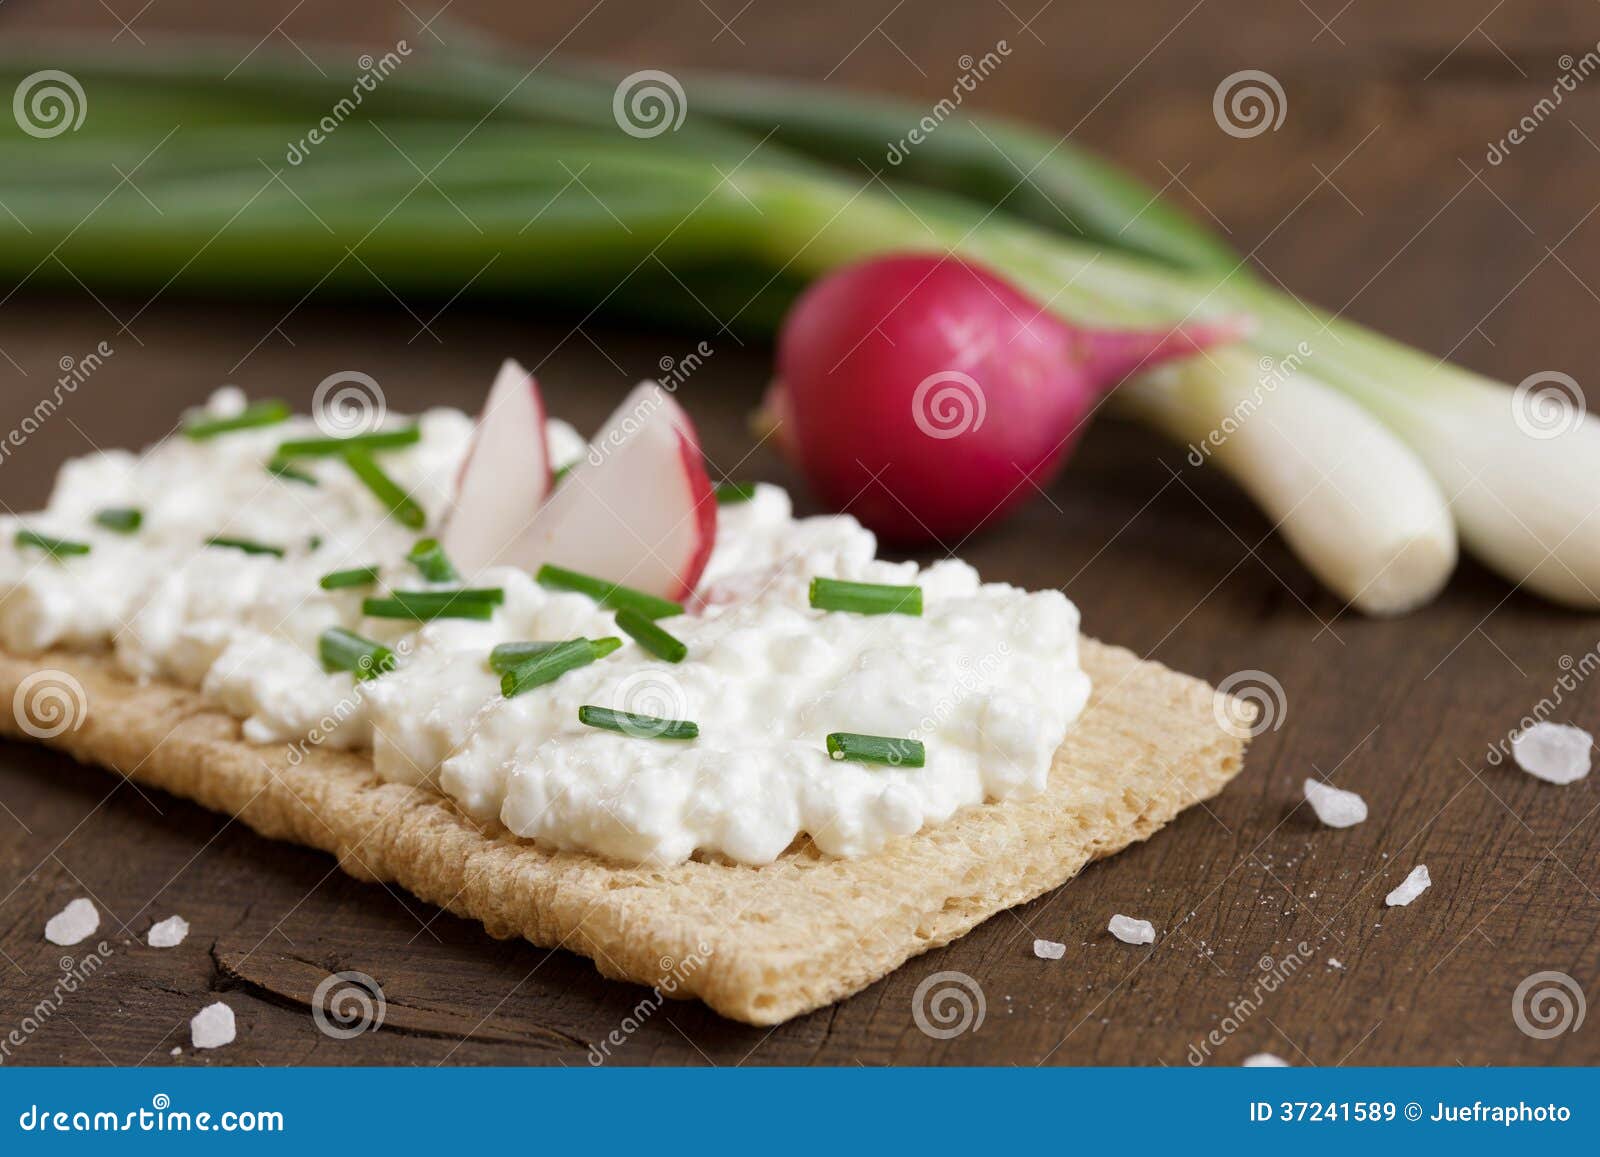 Crispbread with cream cheese on a wooden board